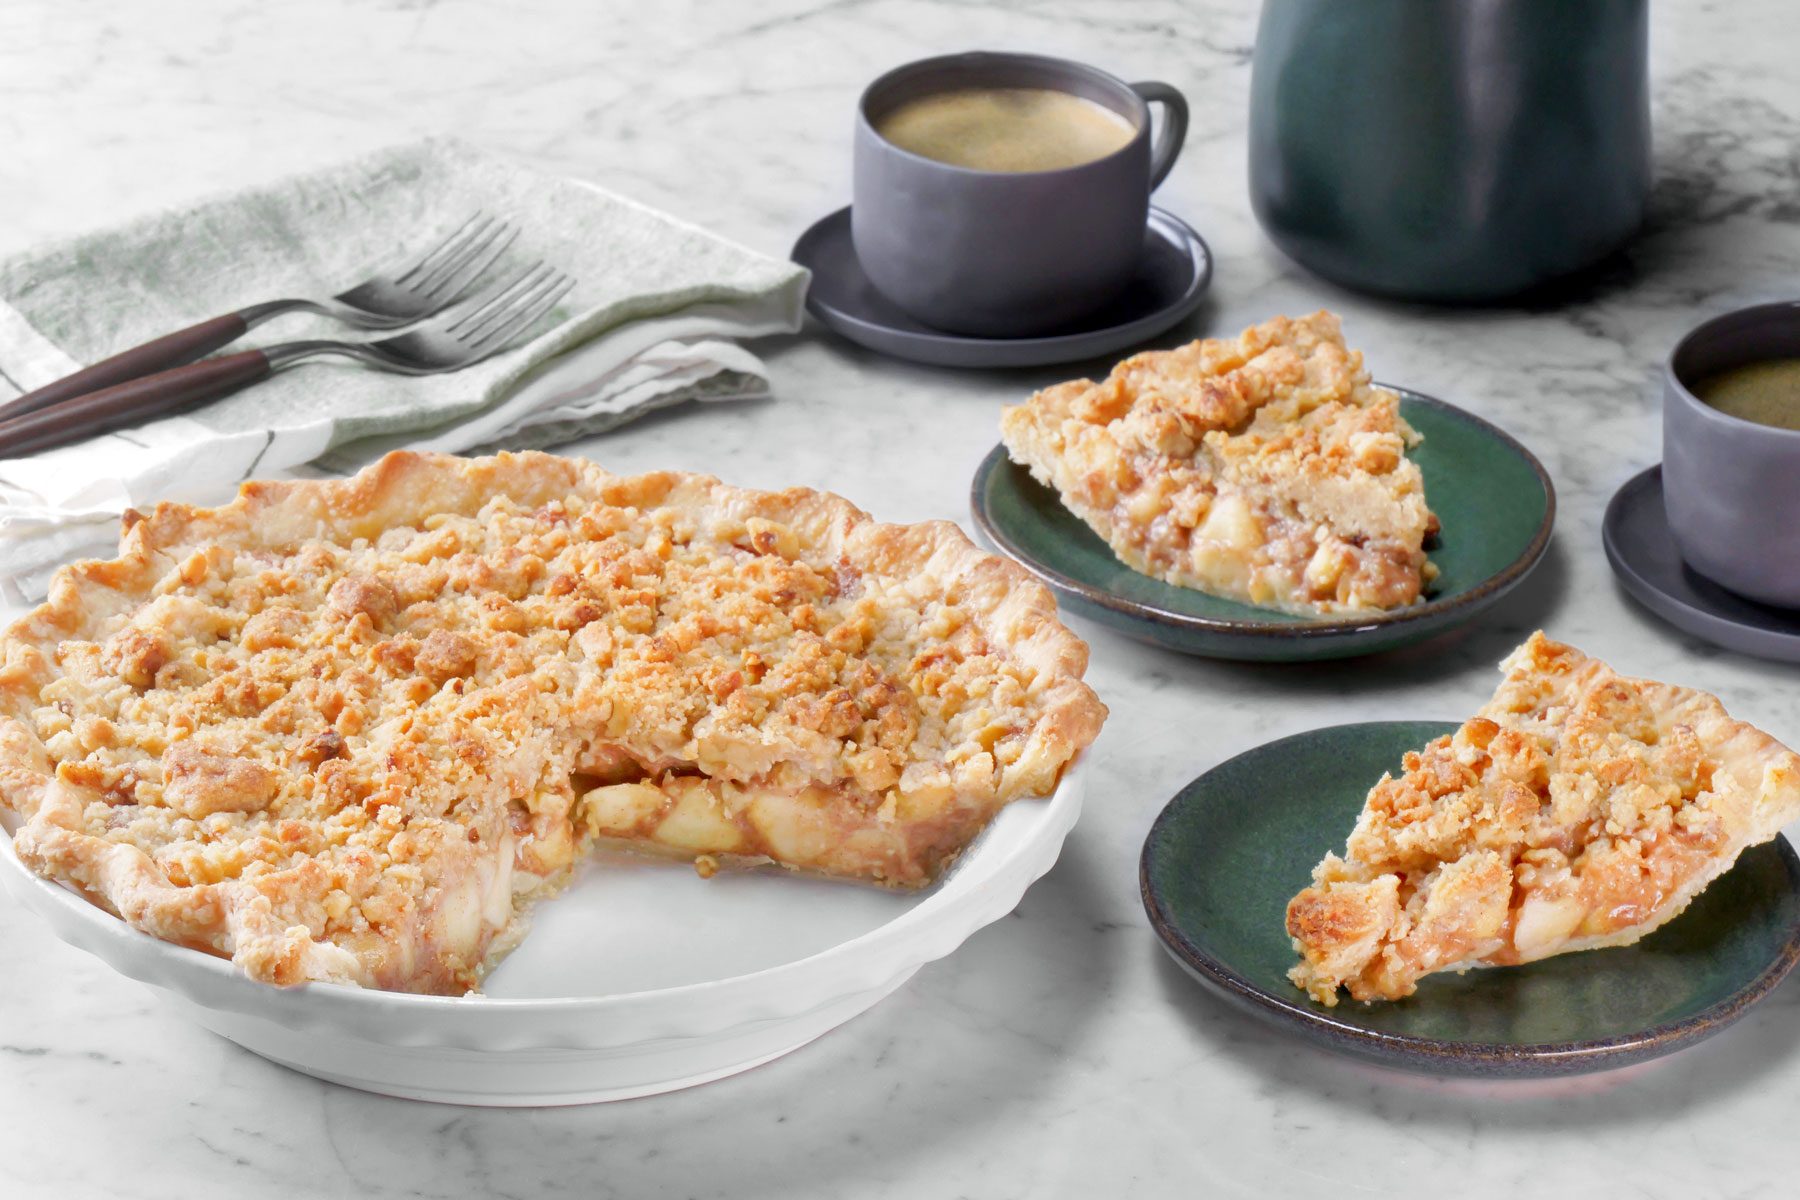 slices of Caramel Apple Pie With Streusel Topping served in a plate with a cp of coffee